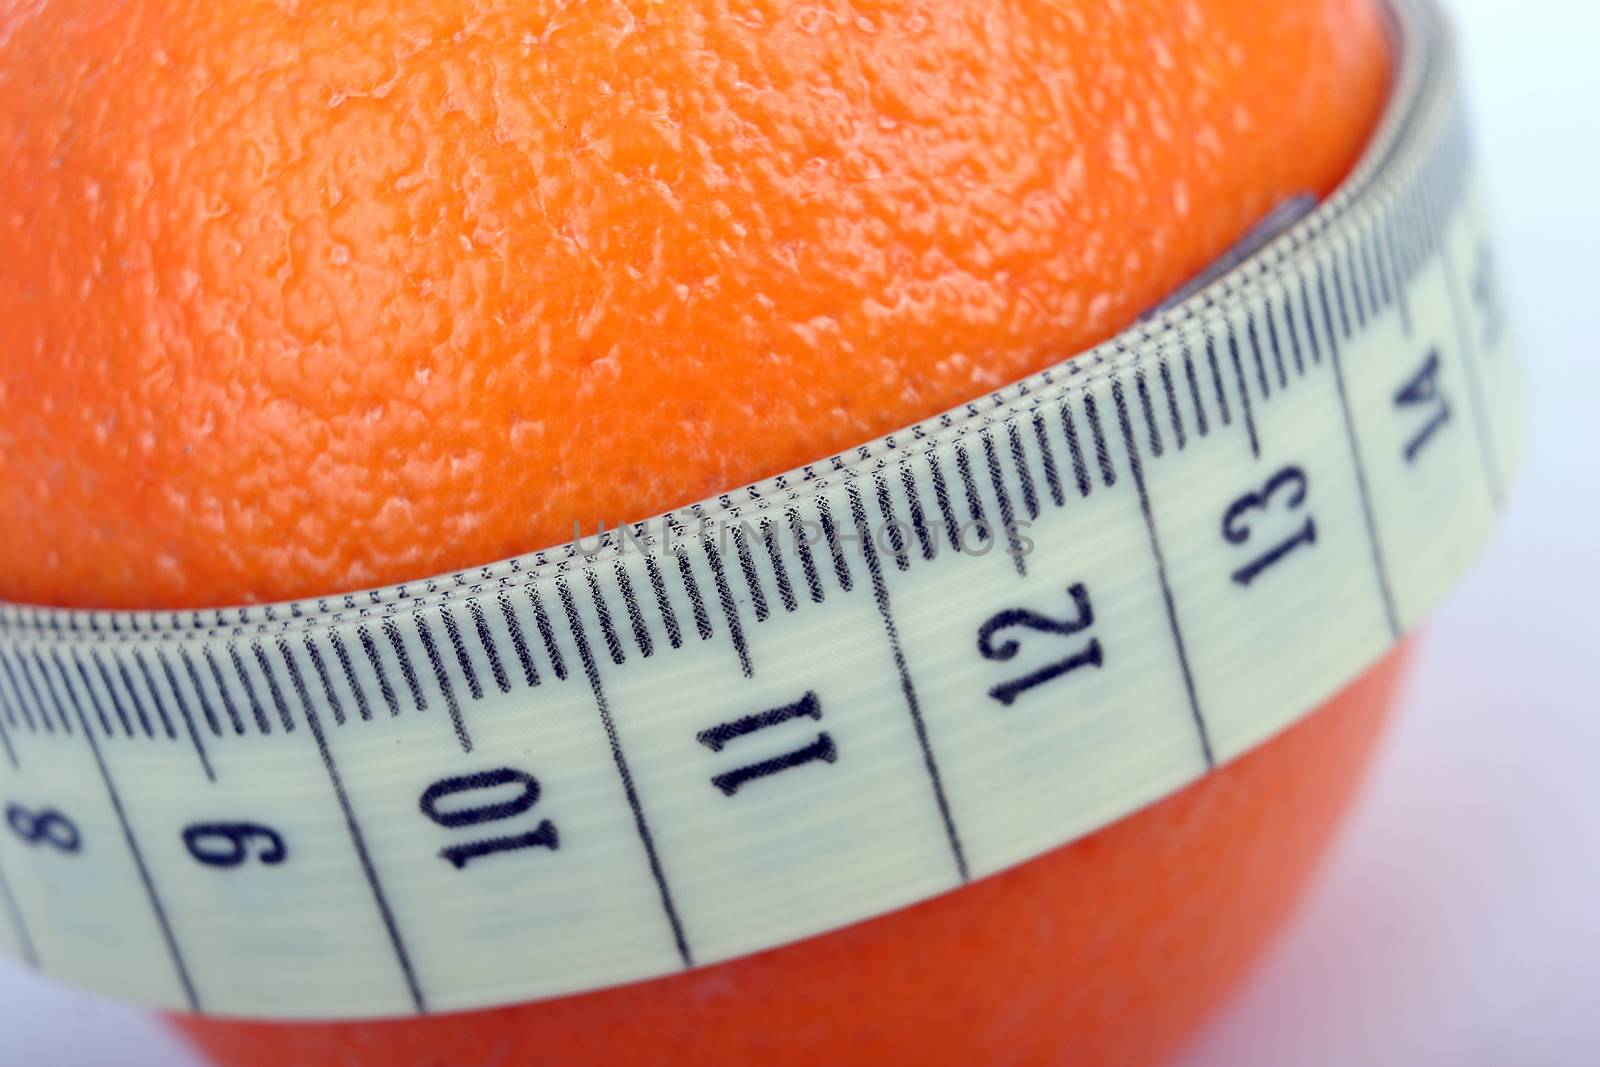 Supple orange with a tape measure - symbol of the fight against cellulite.